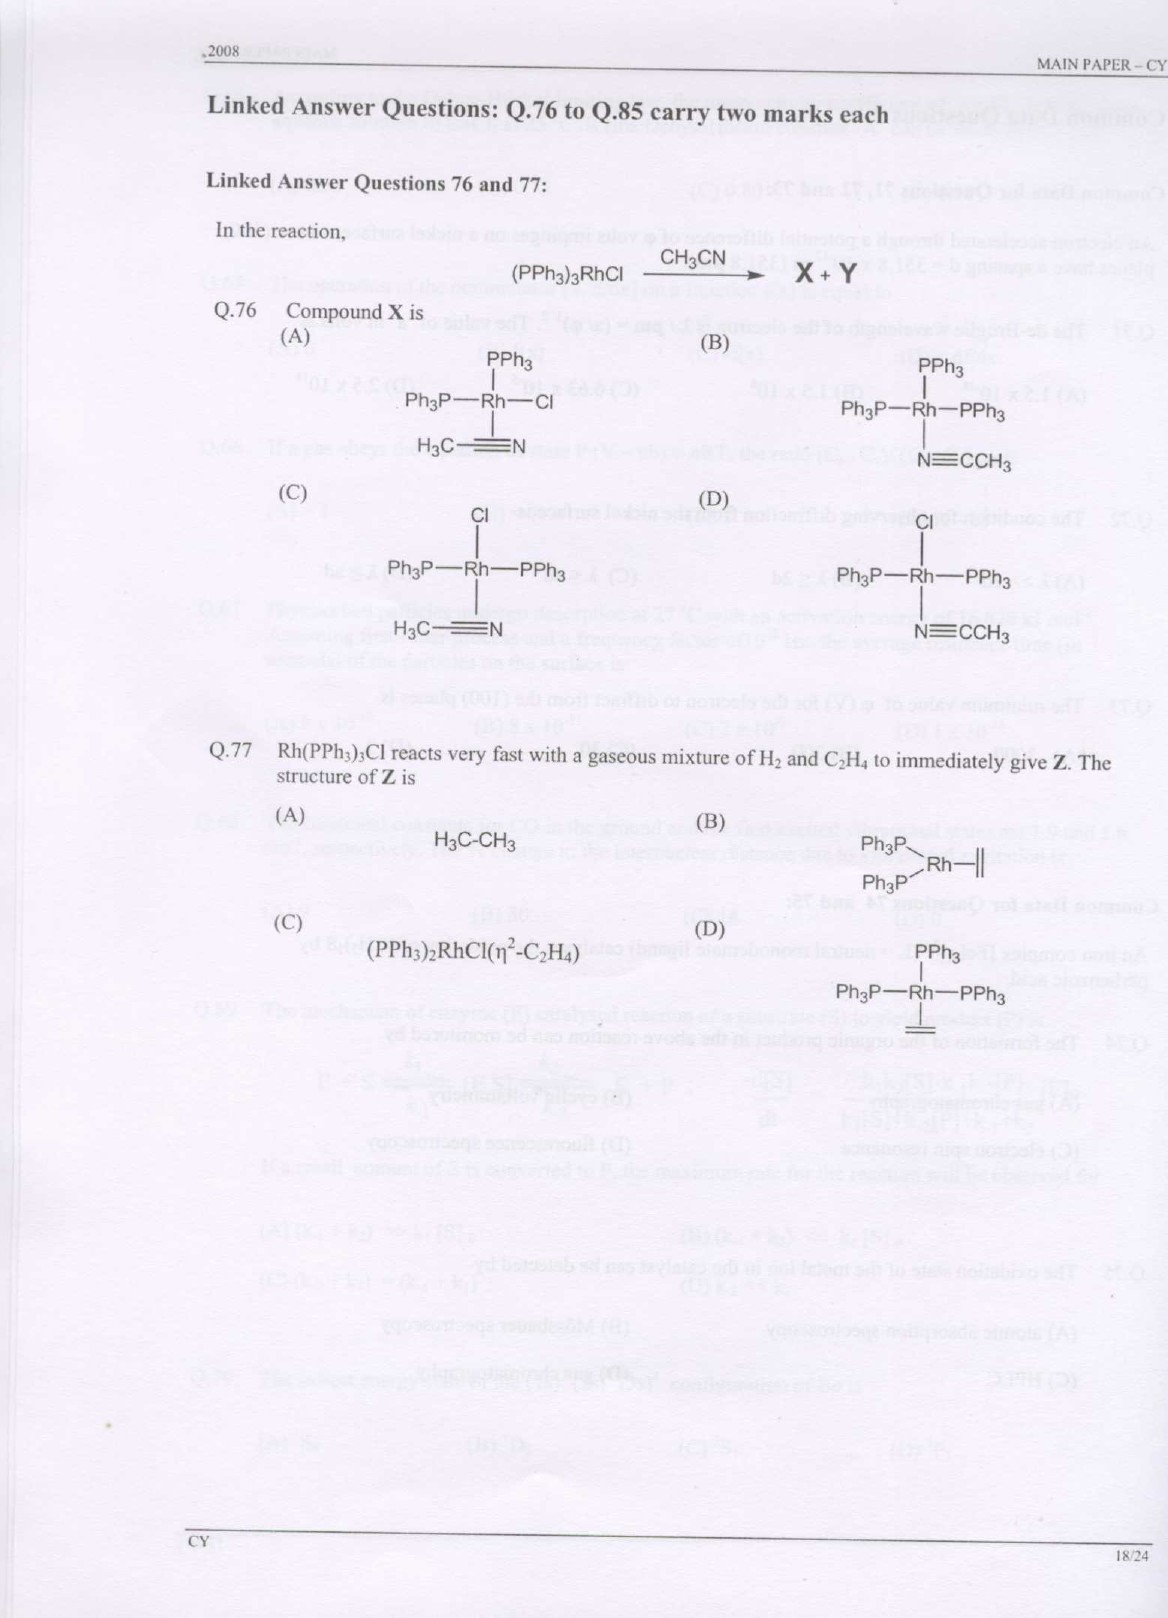 GATE Exam Question Paper 2008 Chemistry 18